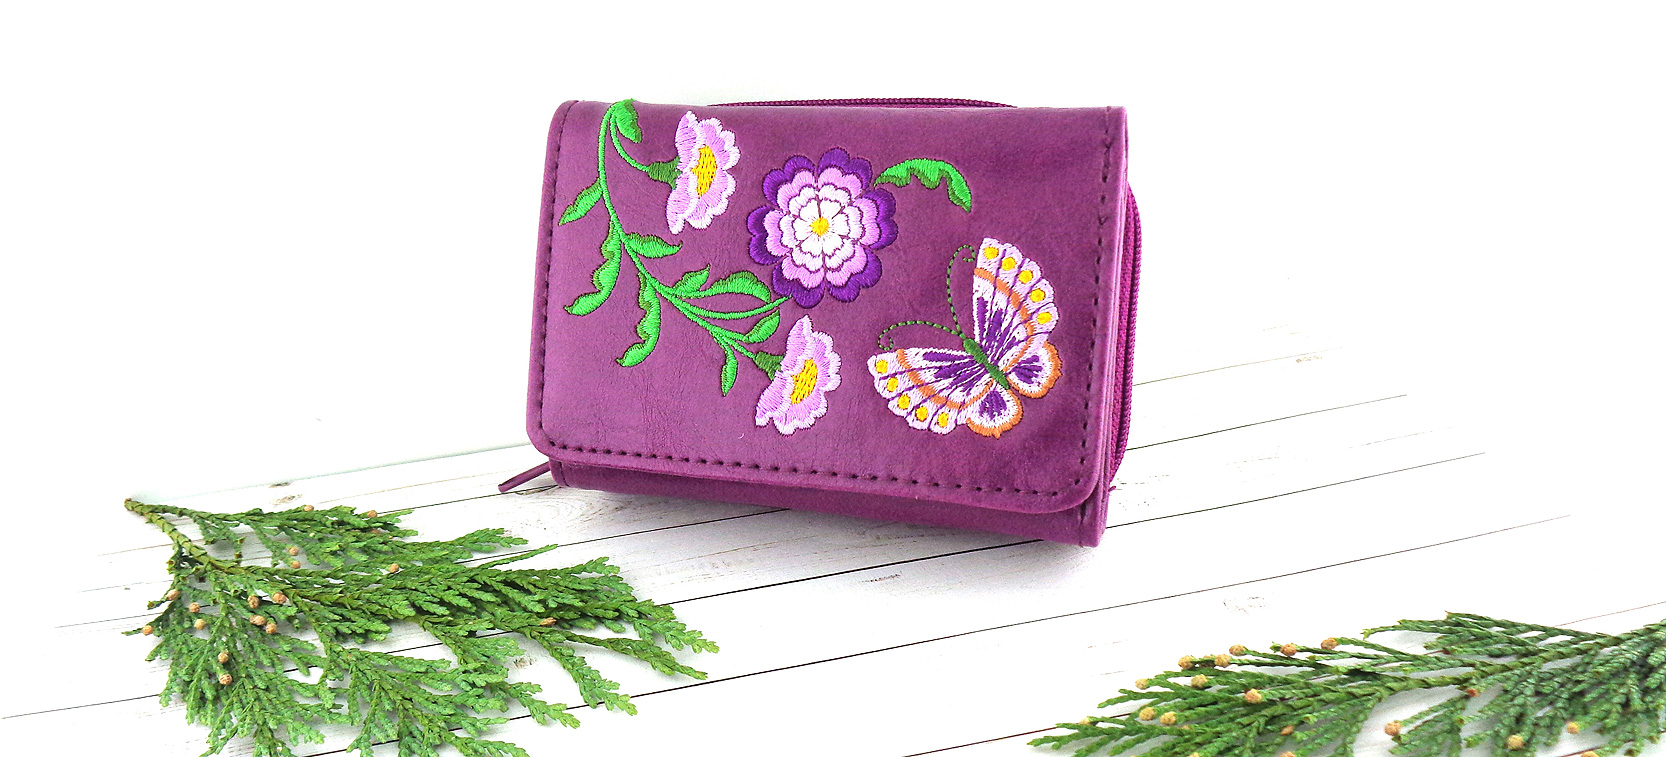 LAVISHY Elma collection design & wholesale embroidered small wallets with flower & butterfly embroidery motif to gift shops, boutiques & book stores in Canada, USA and worldwide since 2001.